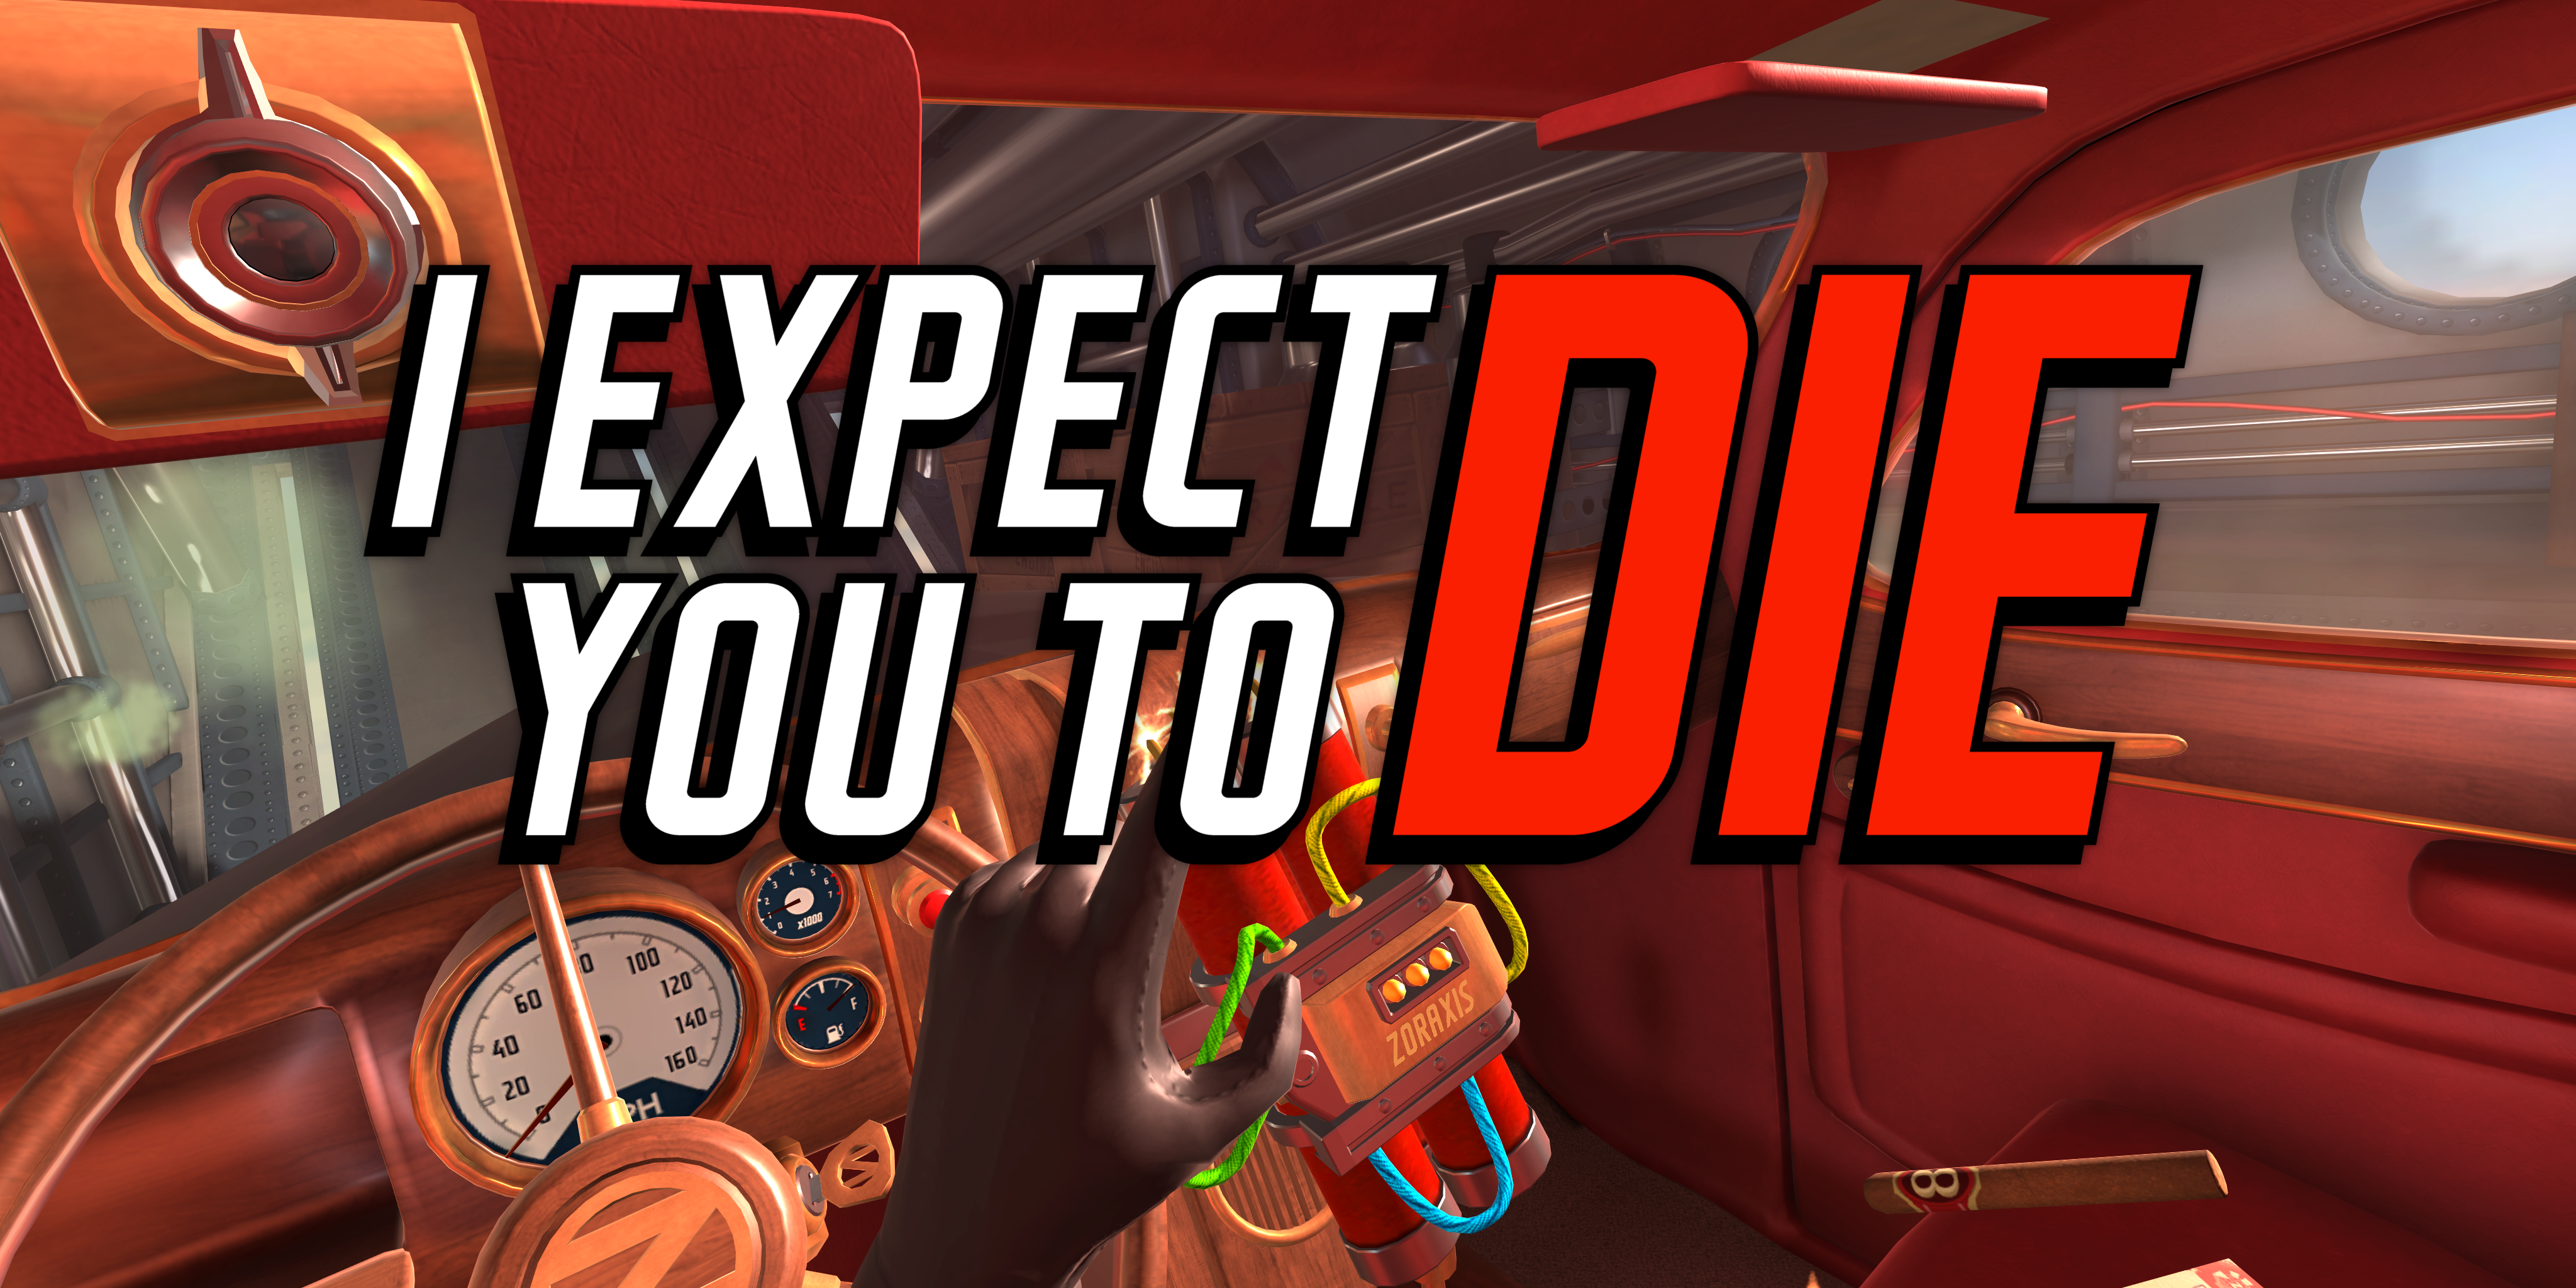 Expect на русском. I expect you to die. I Expert you to die VR. I expect you to die 2. I expect you to die обложка.